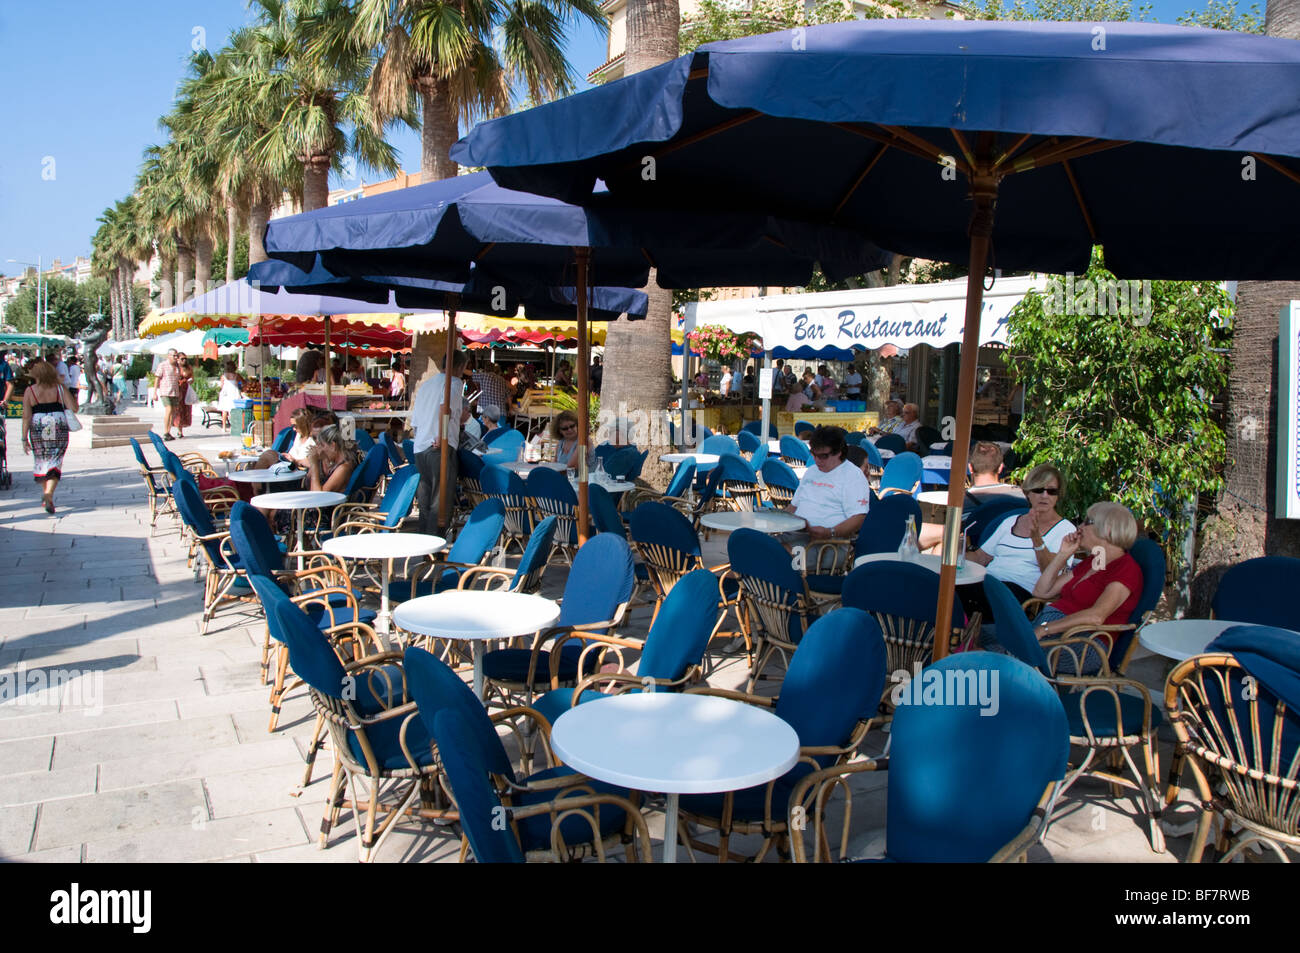 Pavement cafe at seafront, Bandol, Cote d'Azur, South France Stock Photo